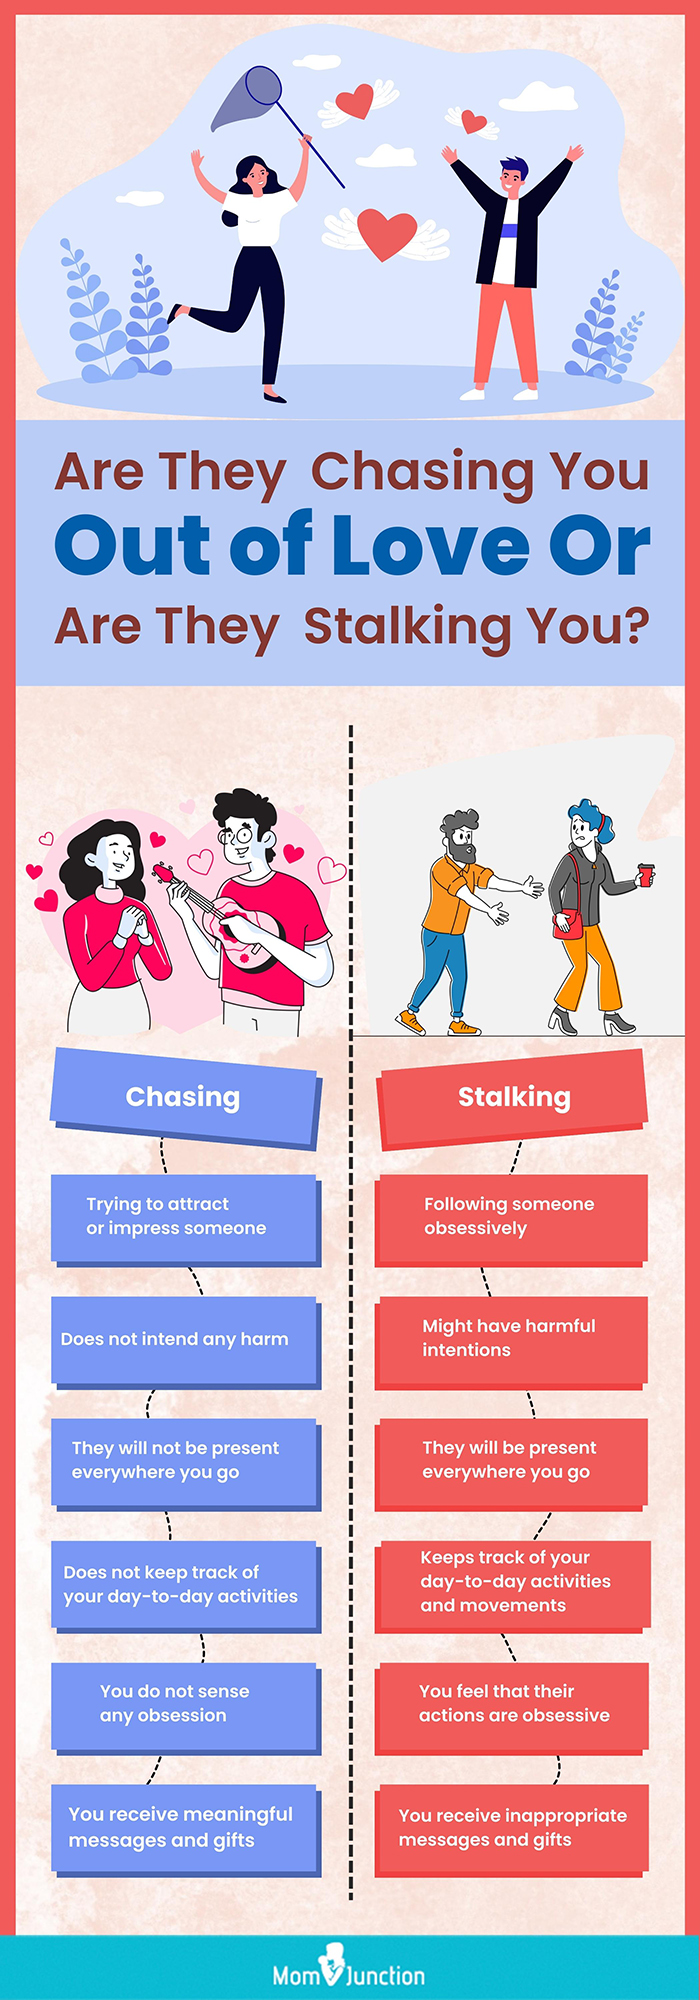 differences between chasing someone and stalking someone [infographic]